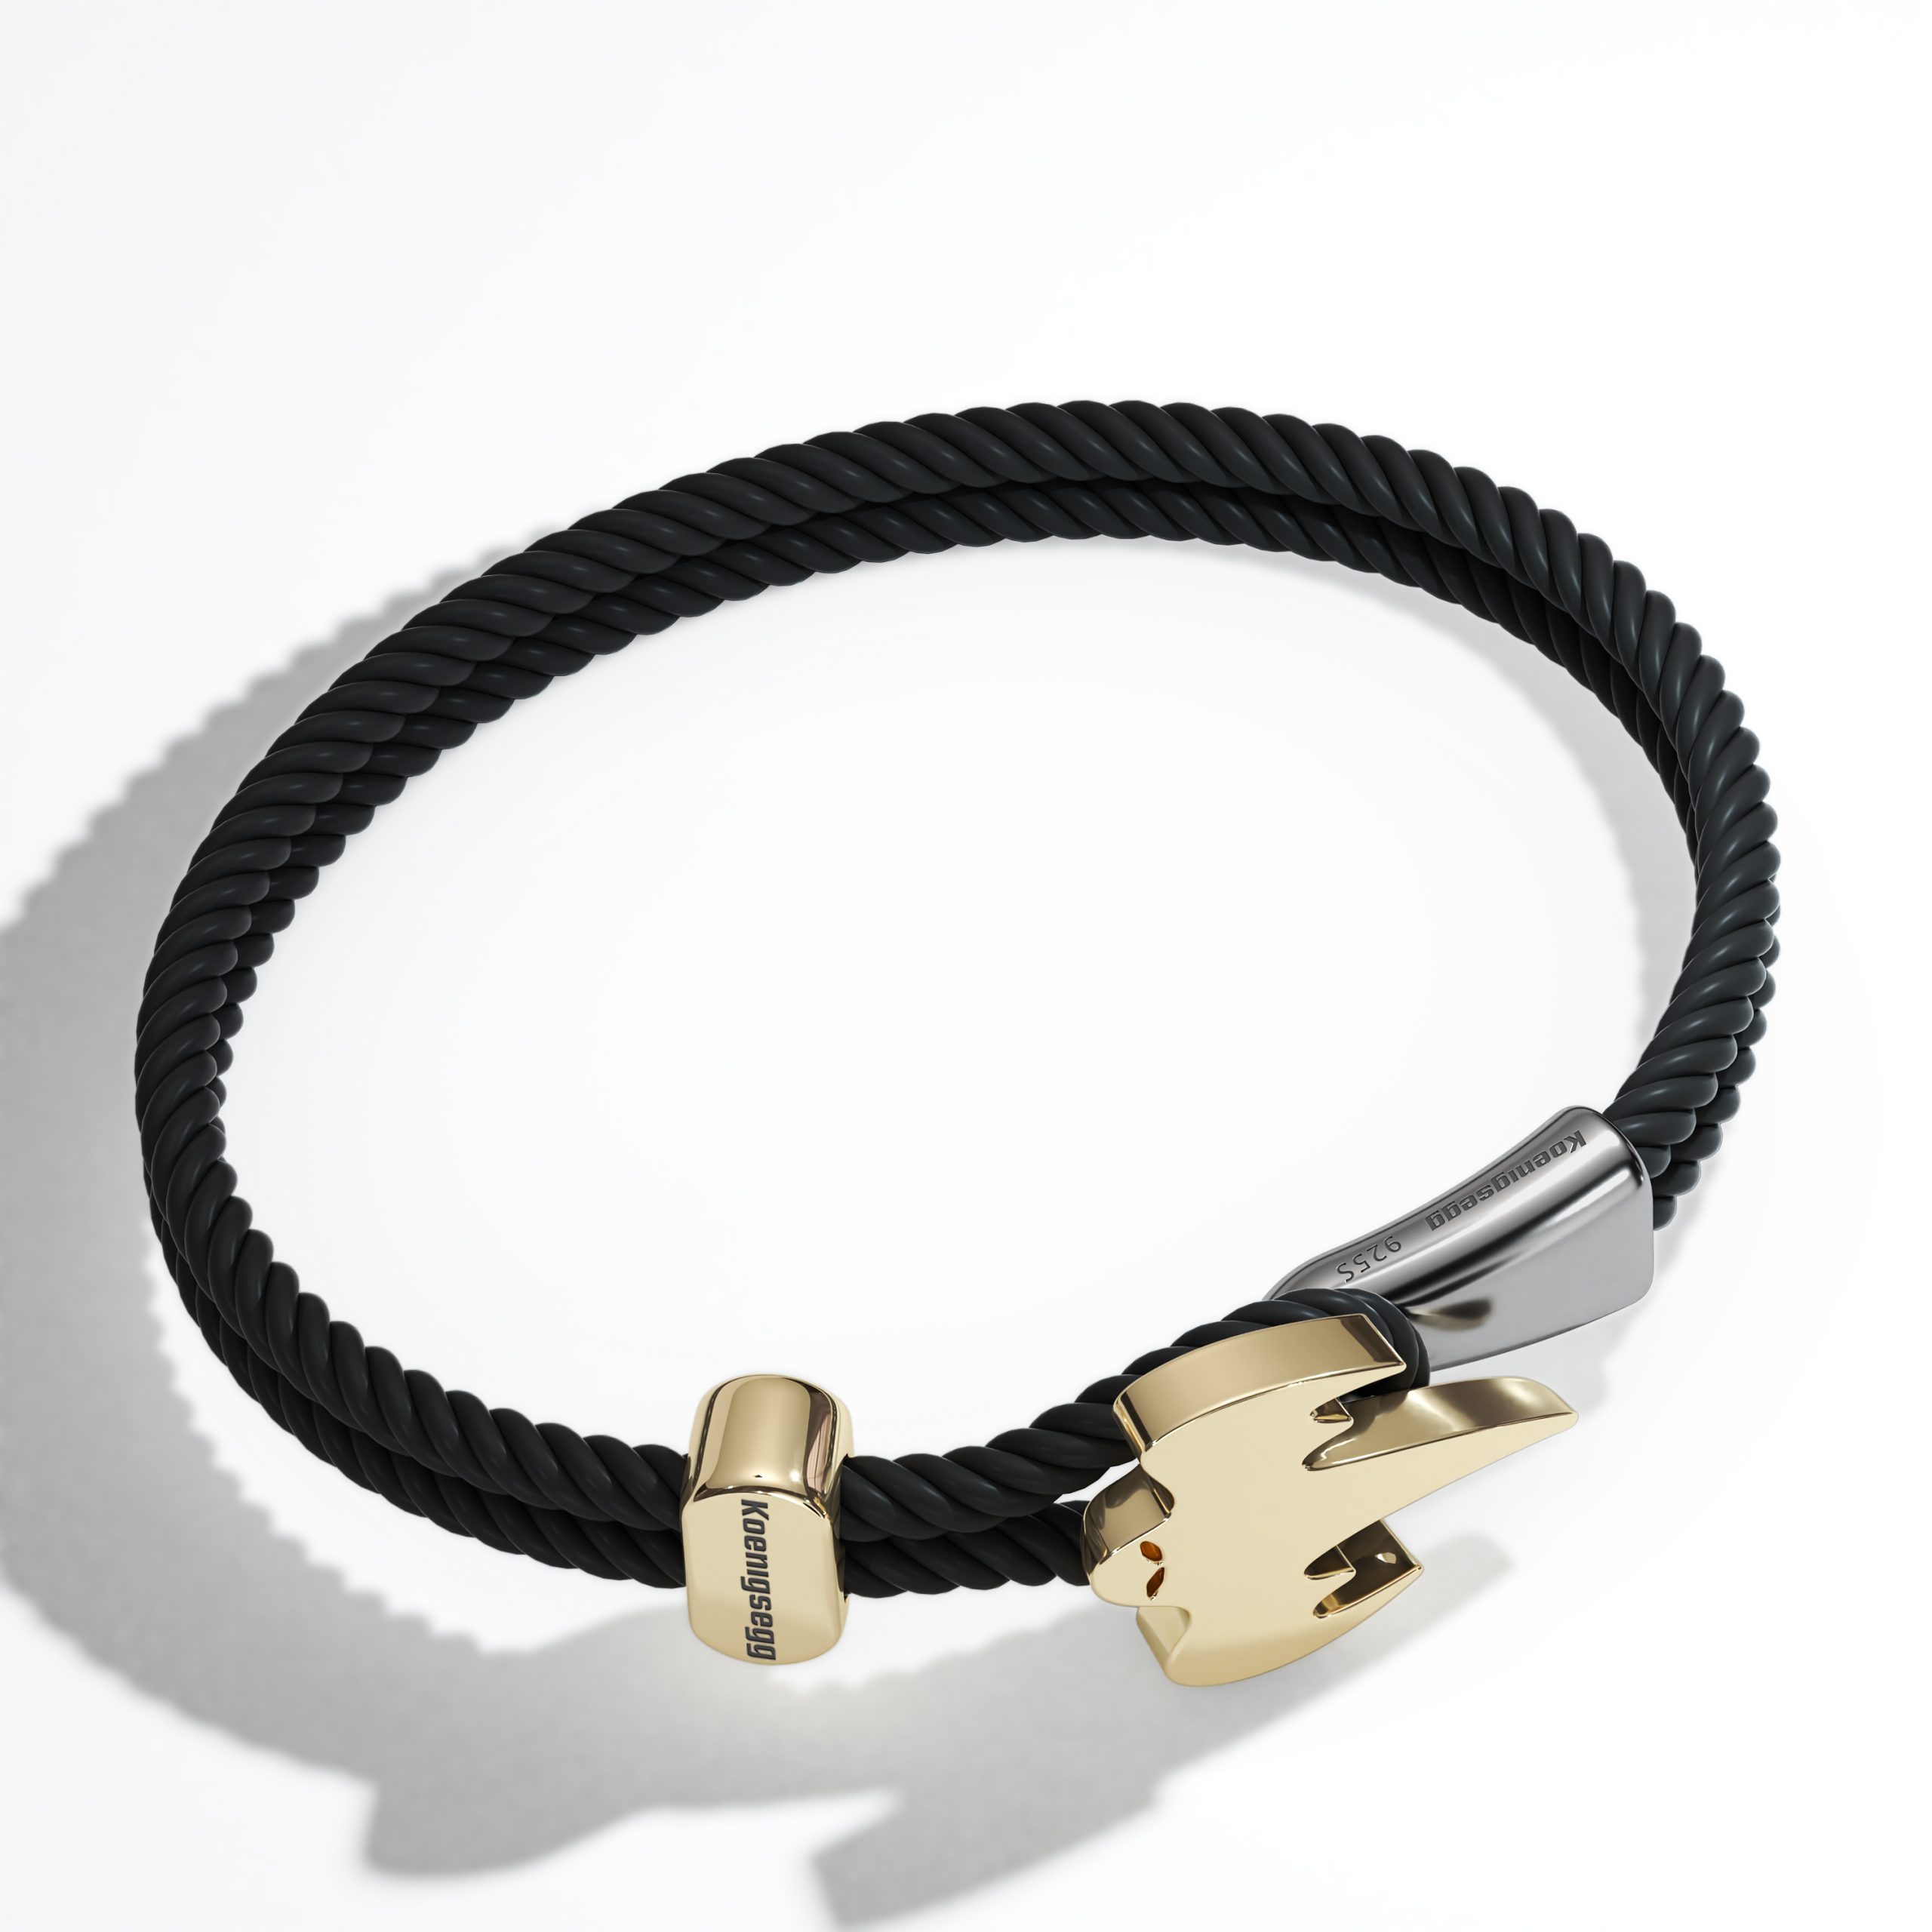 Gold Ghost Chain Bracelet with Diamond Accent - Koenigsegg Gear